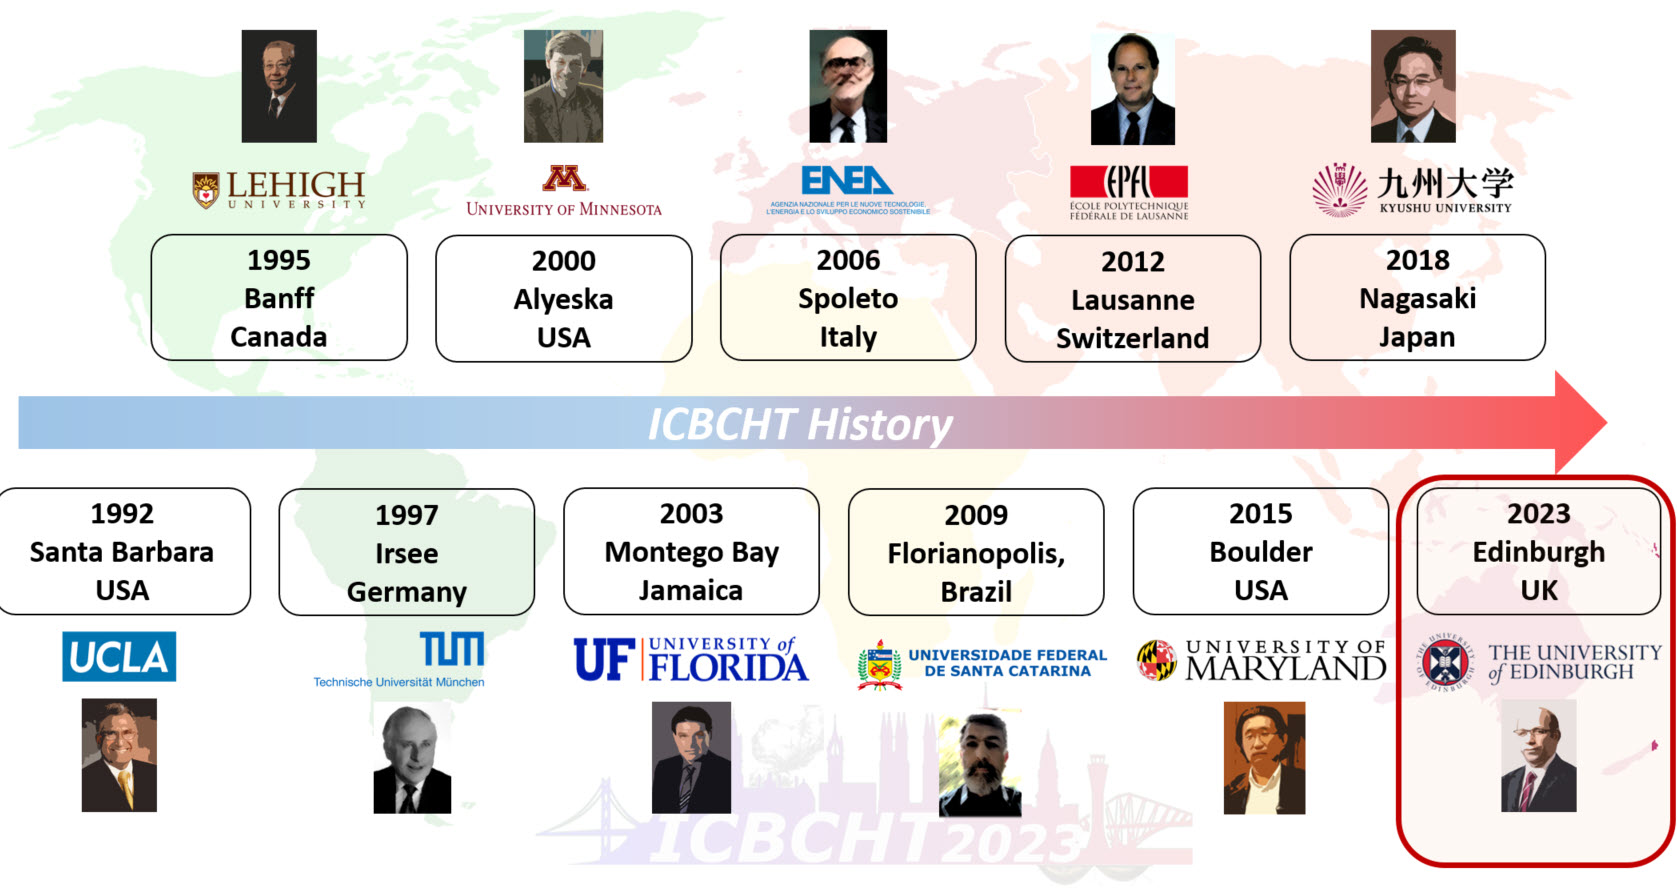 ICBCHT Conference History